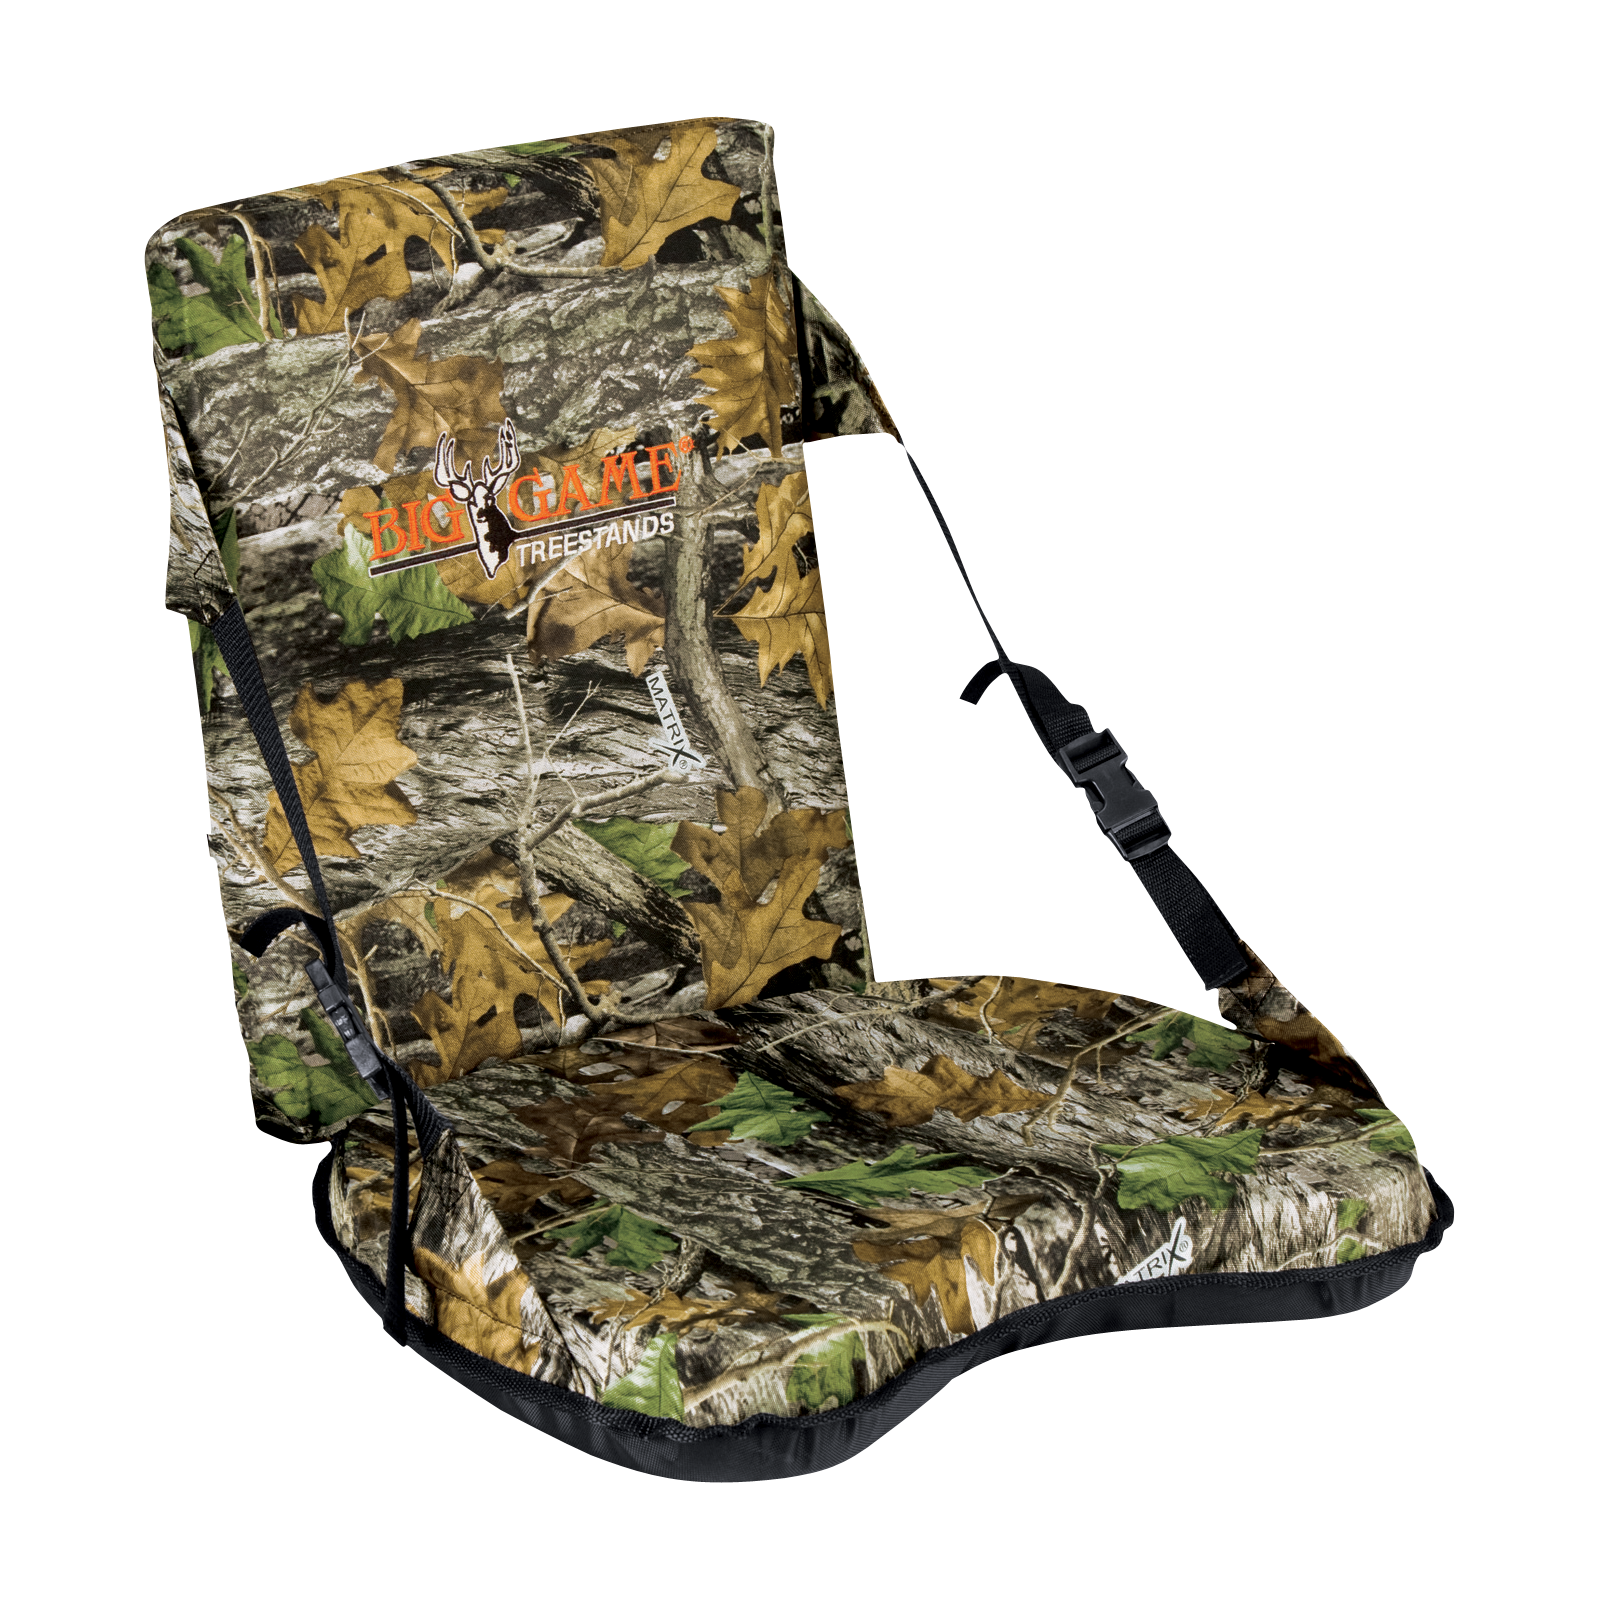 Tail Mate GelCore Seat Cushion (6-Pack) for Hunting, Fishing, or